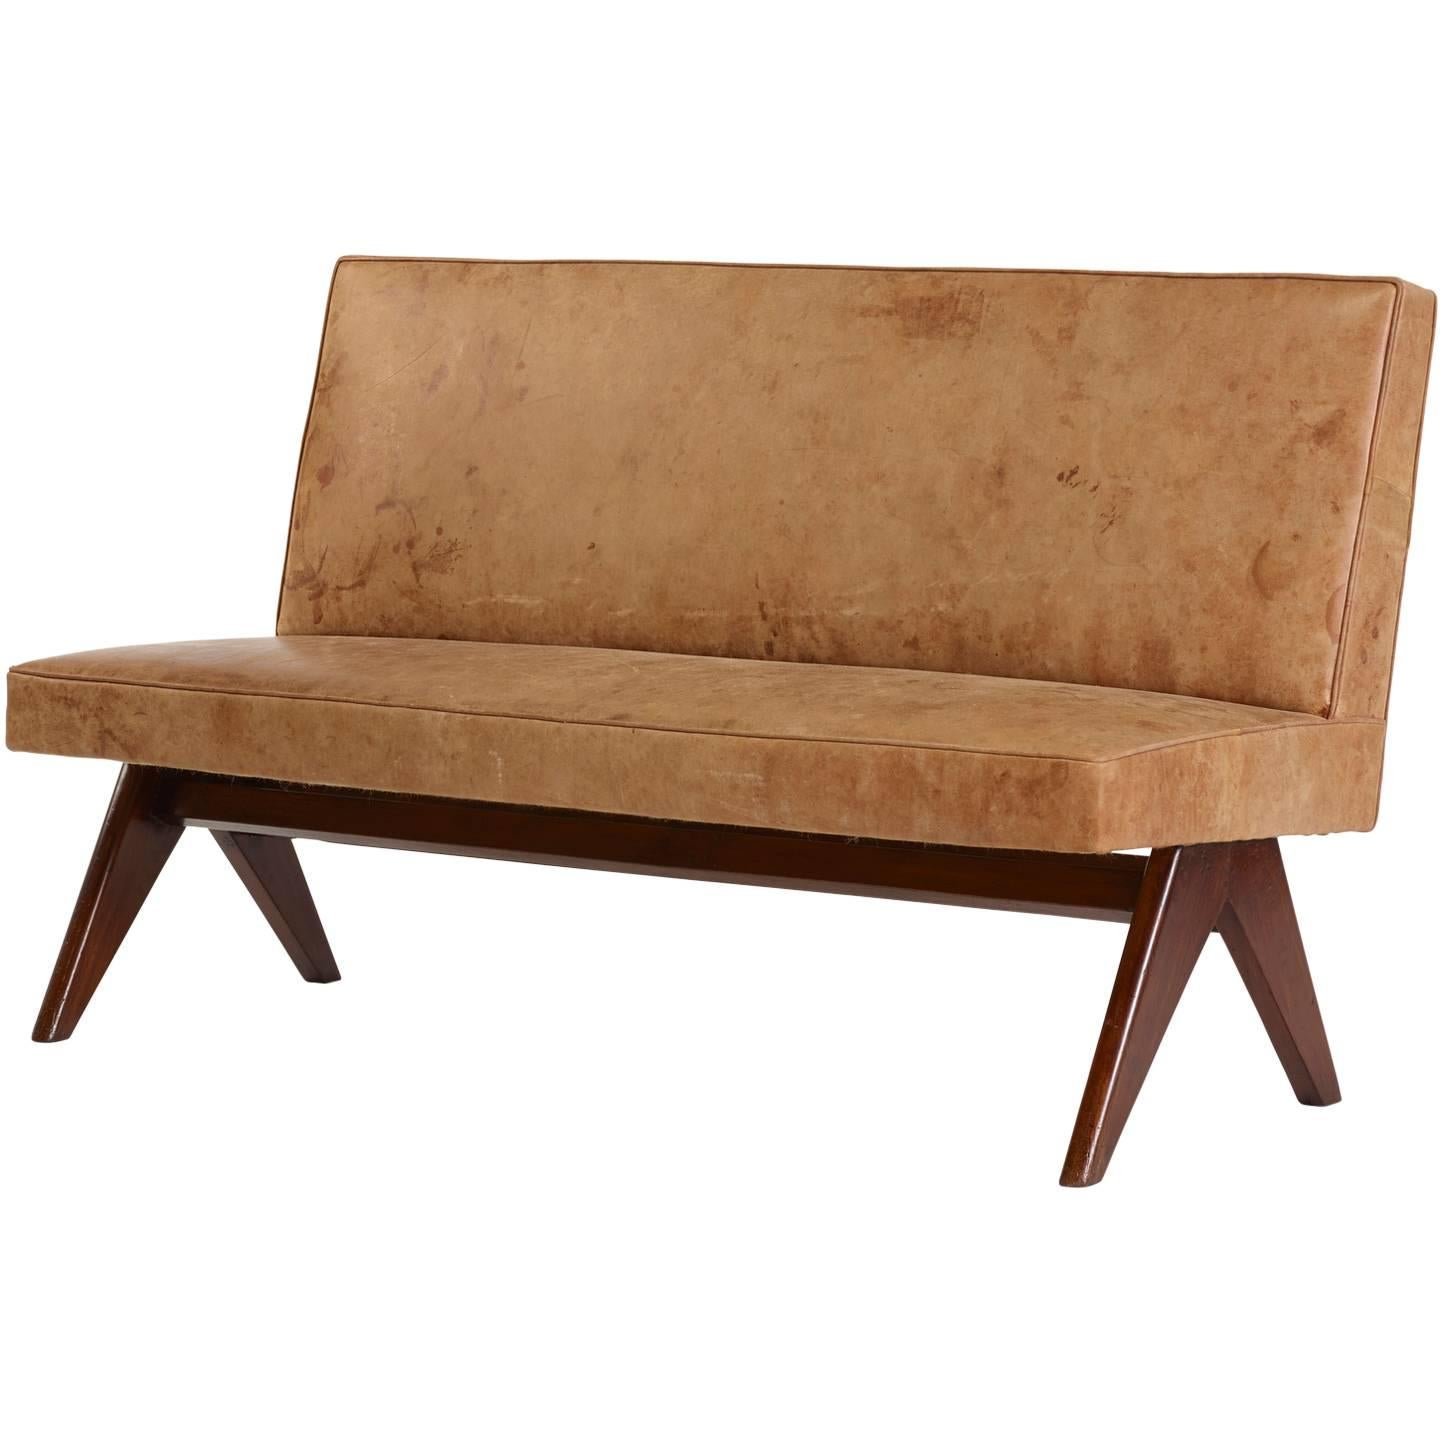 "Public Bench" Settee by Pierre Jeanneret from the High Court, Chandigarh